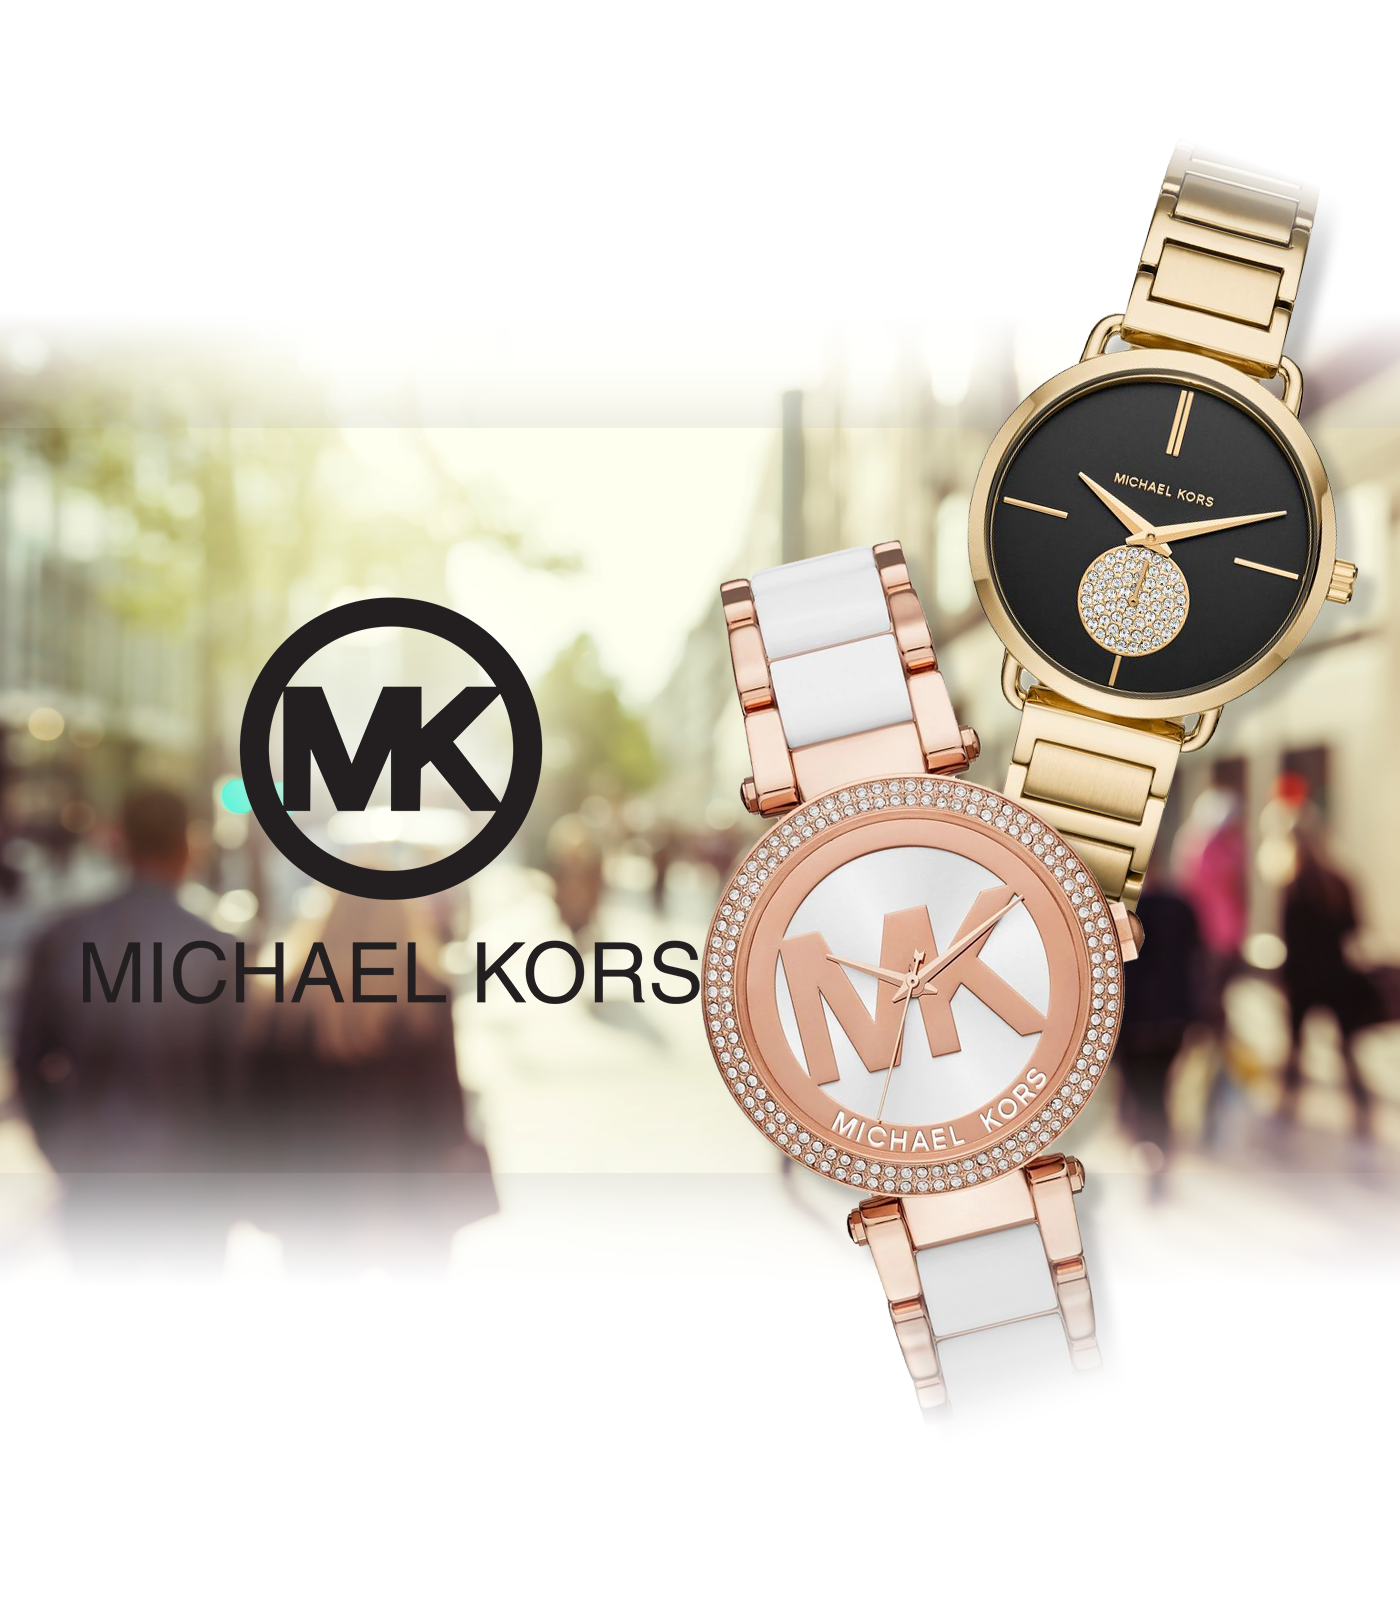 Amazoncom Michael Kors Mens Brecken Stainless Steel Quartz Watch with  Plastic Strap Multicolor 22 Model MK8849  Clothing Shoes  Jewelry